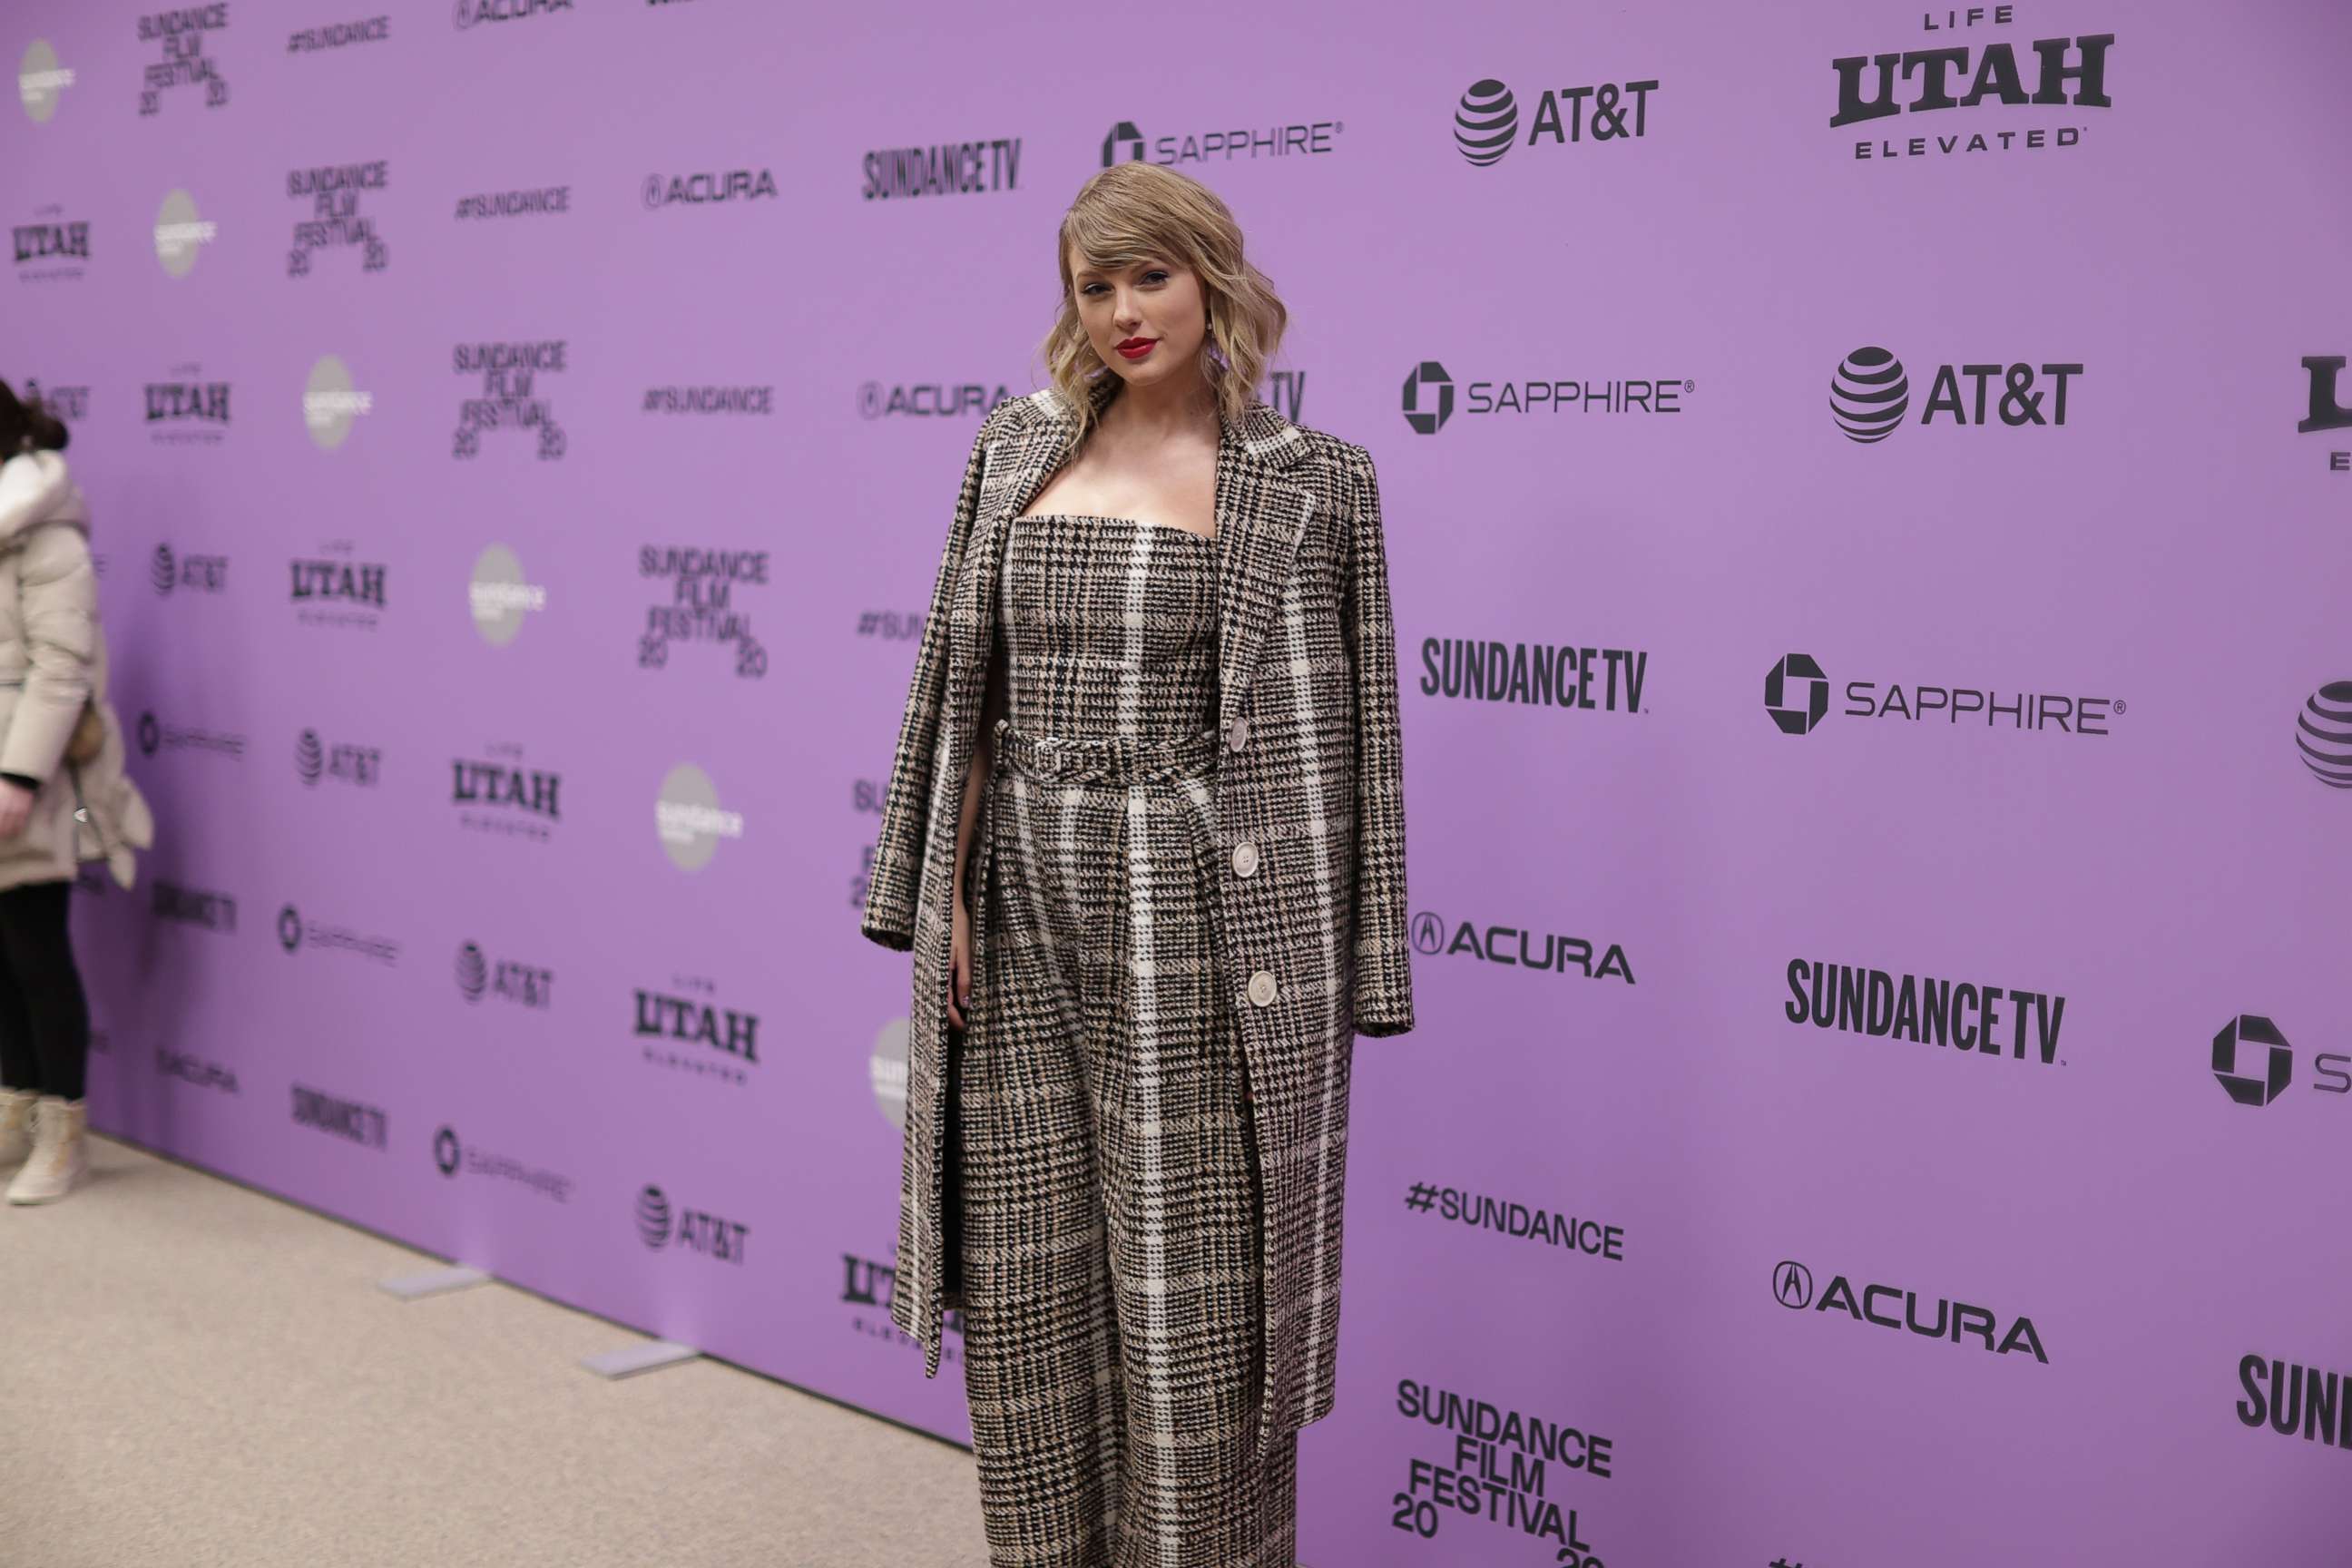 PHOTO: Taylor Swift attends an event, Jan. 23, 2020 in Park City, Utah.